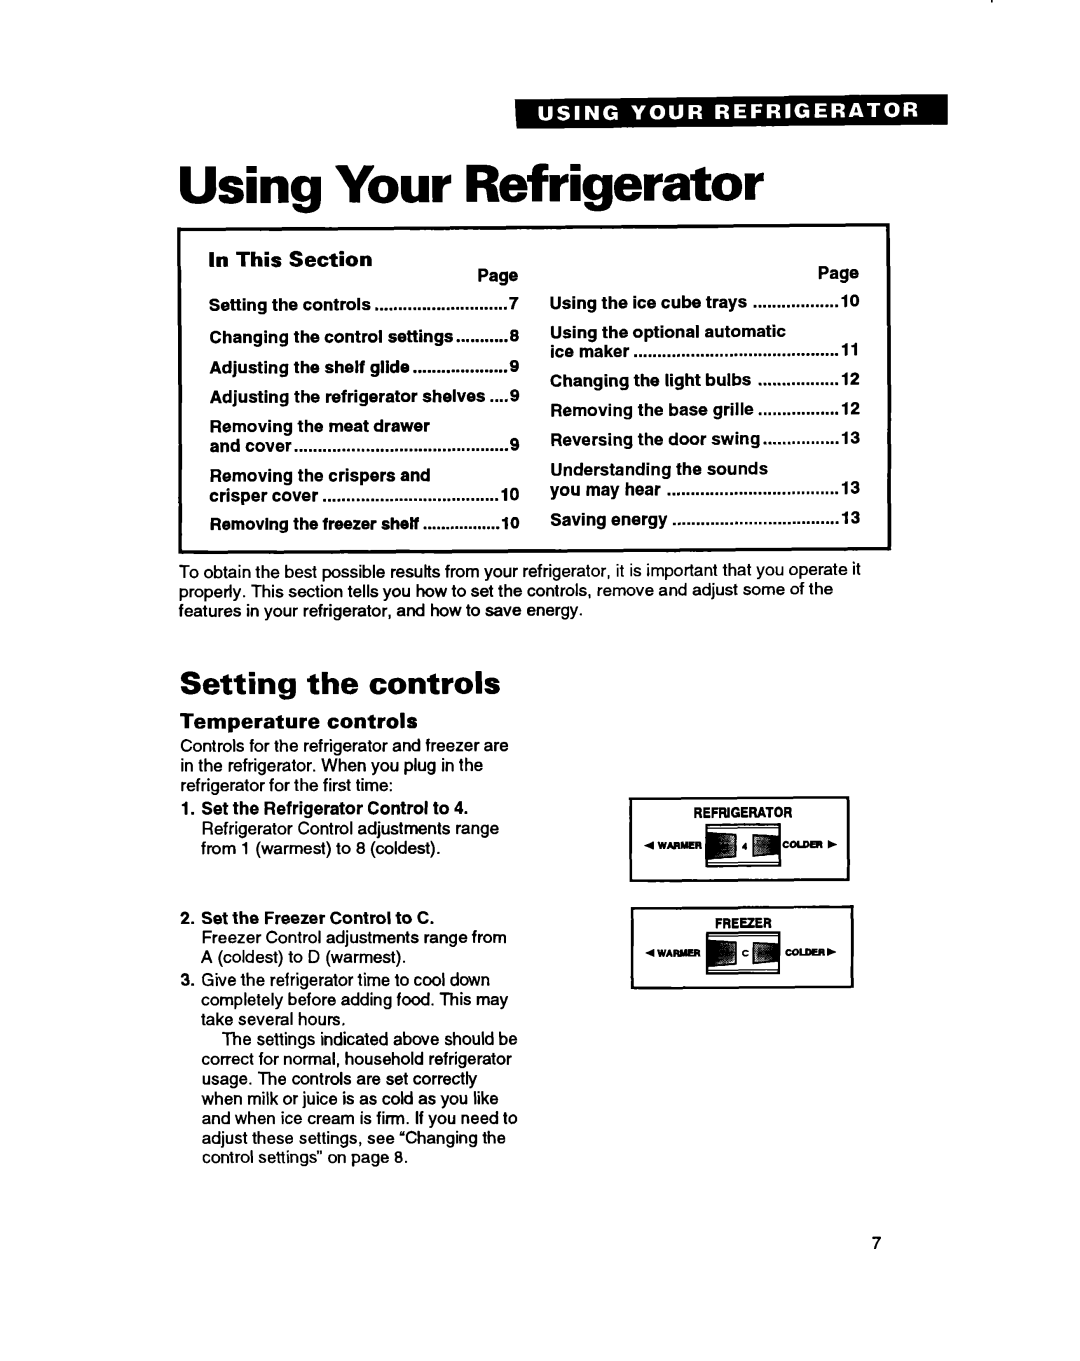 Whirlpool ETZOZK, ETl8ZK Using Your Refrigerator, Setting the controls, In This Section, Temperature controls 